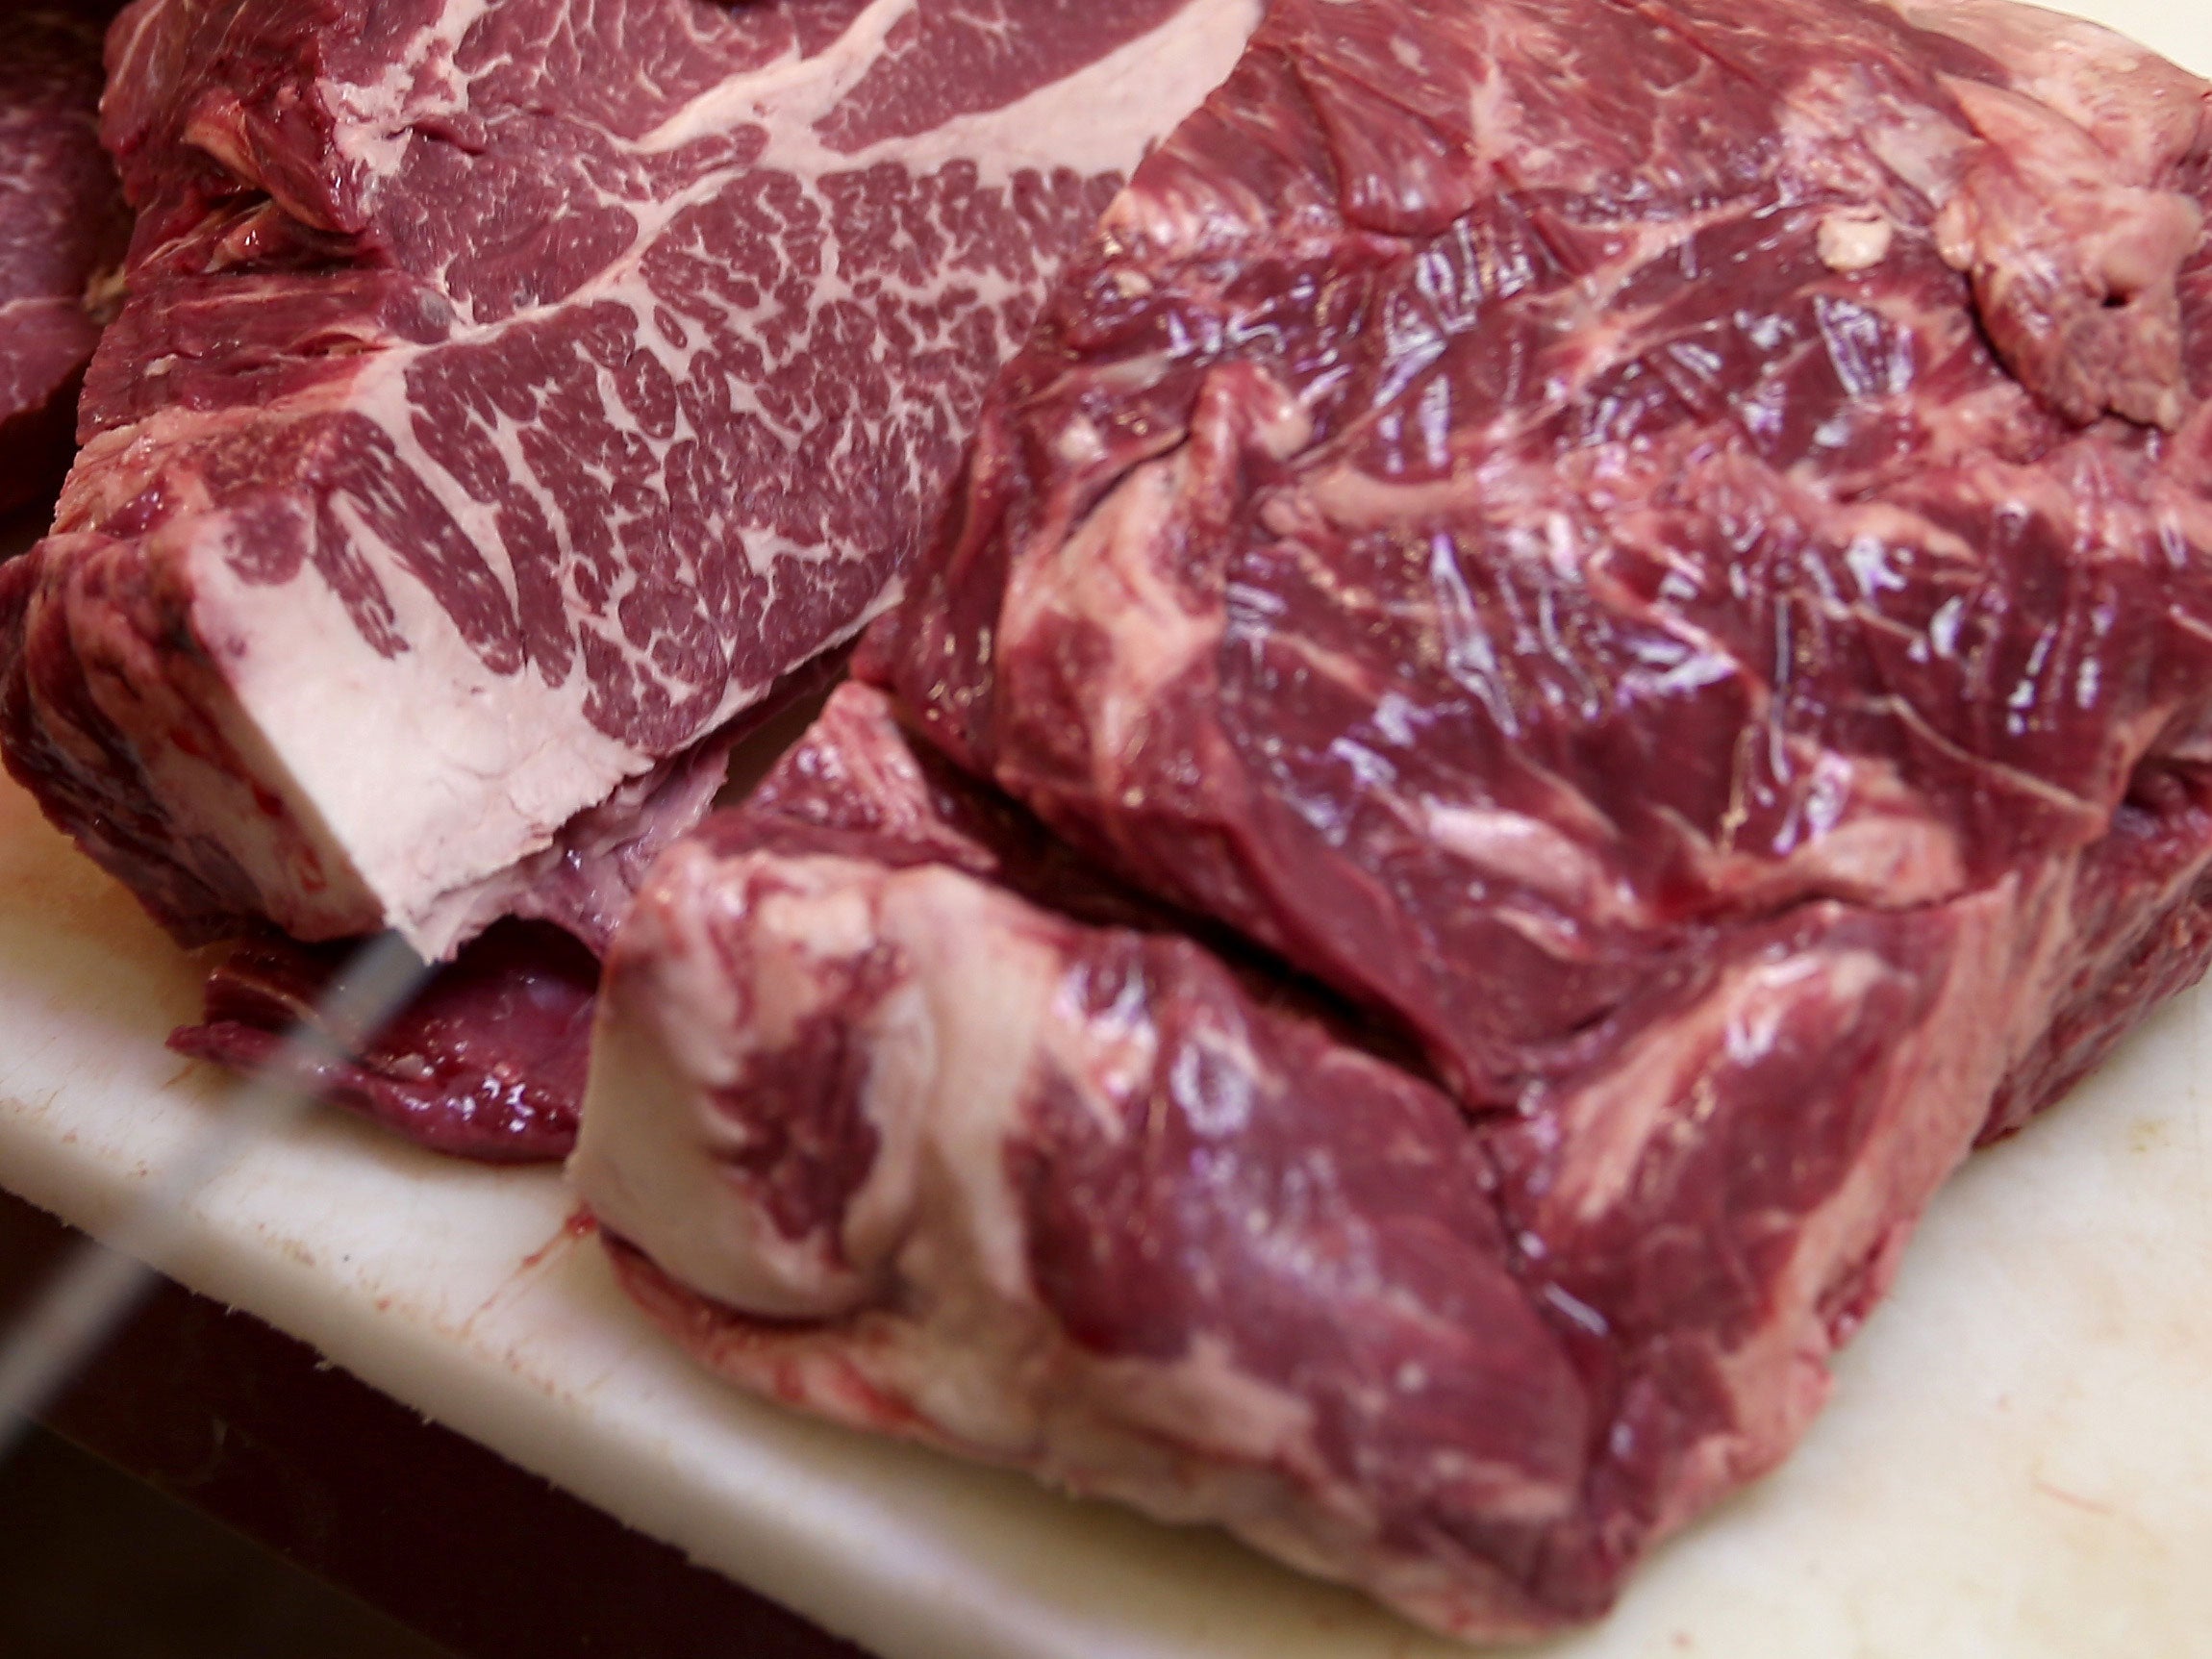 There have been no reported health problems caused by the meat